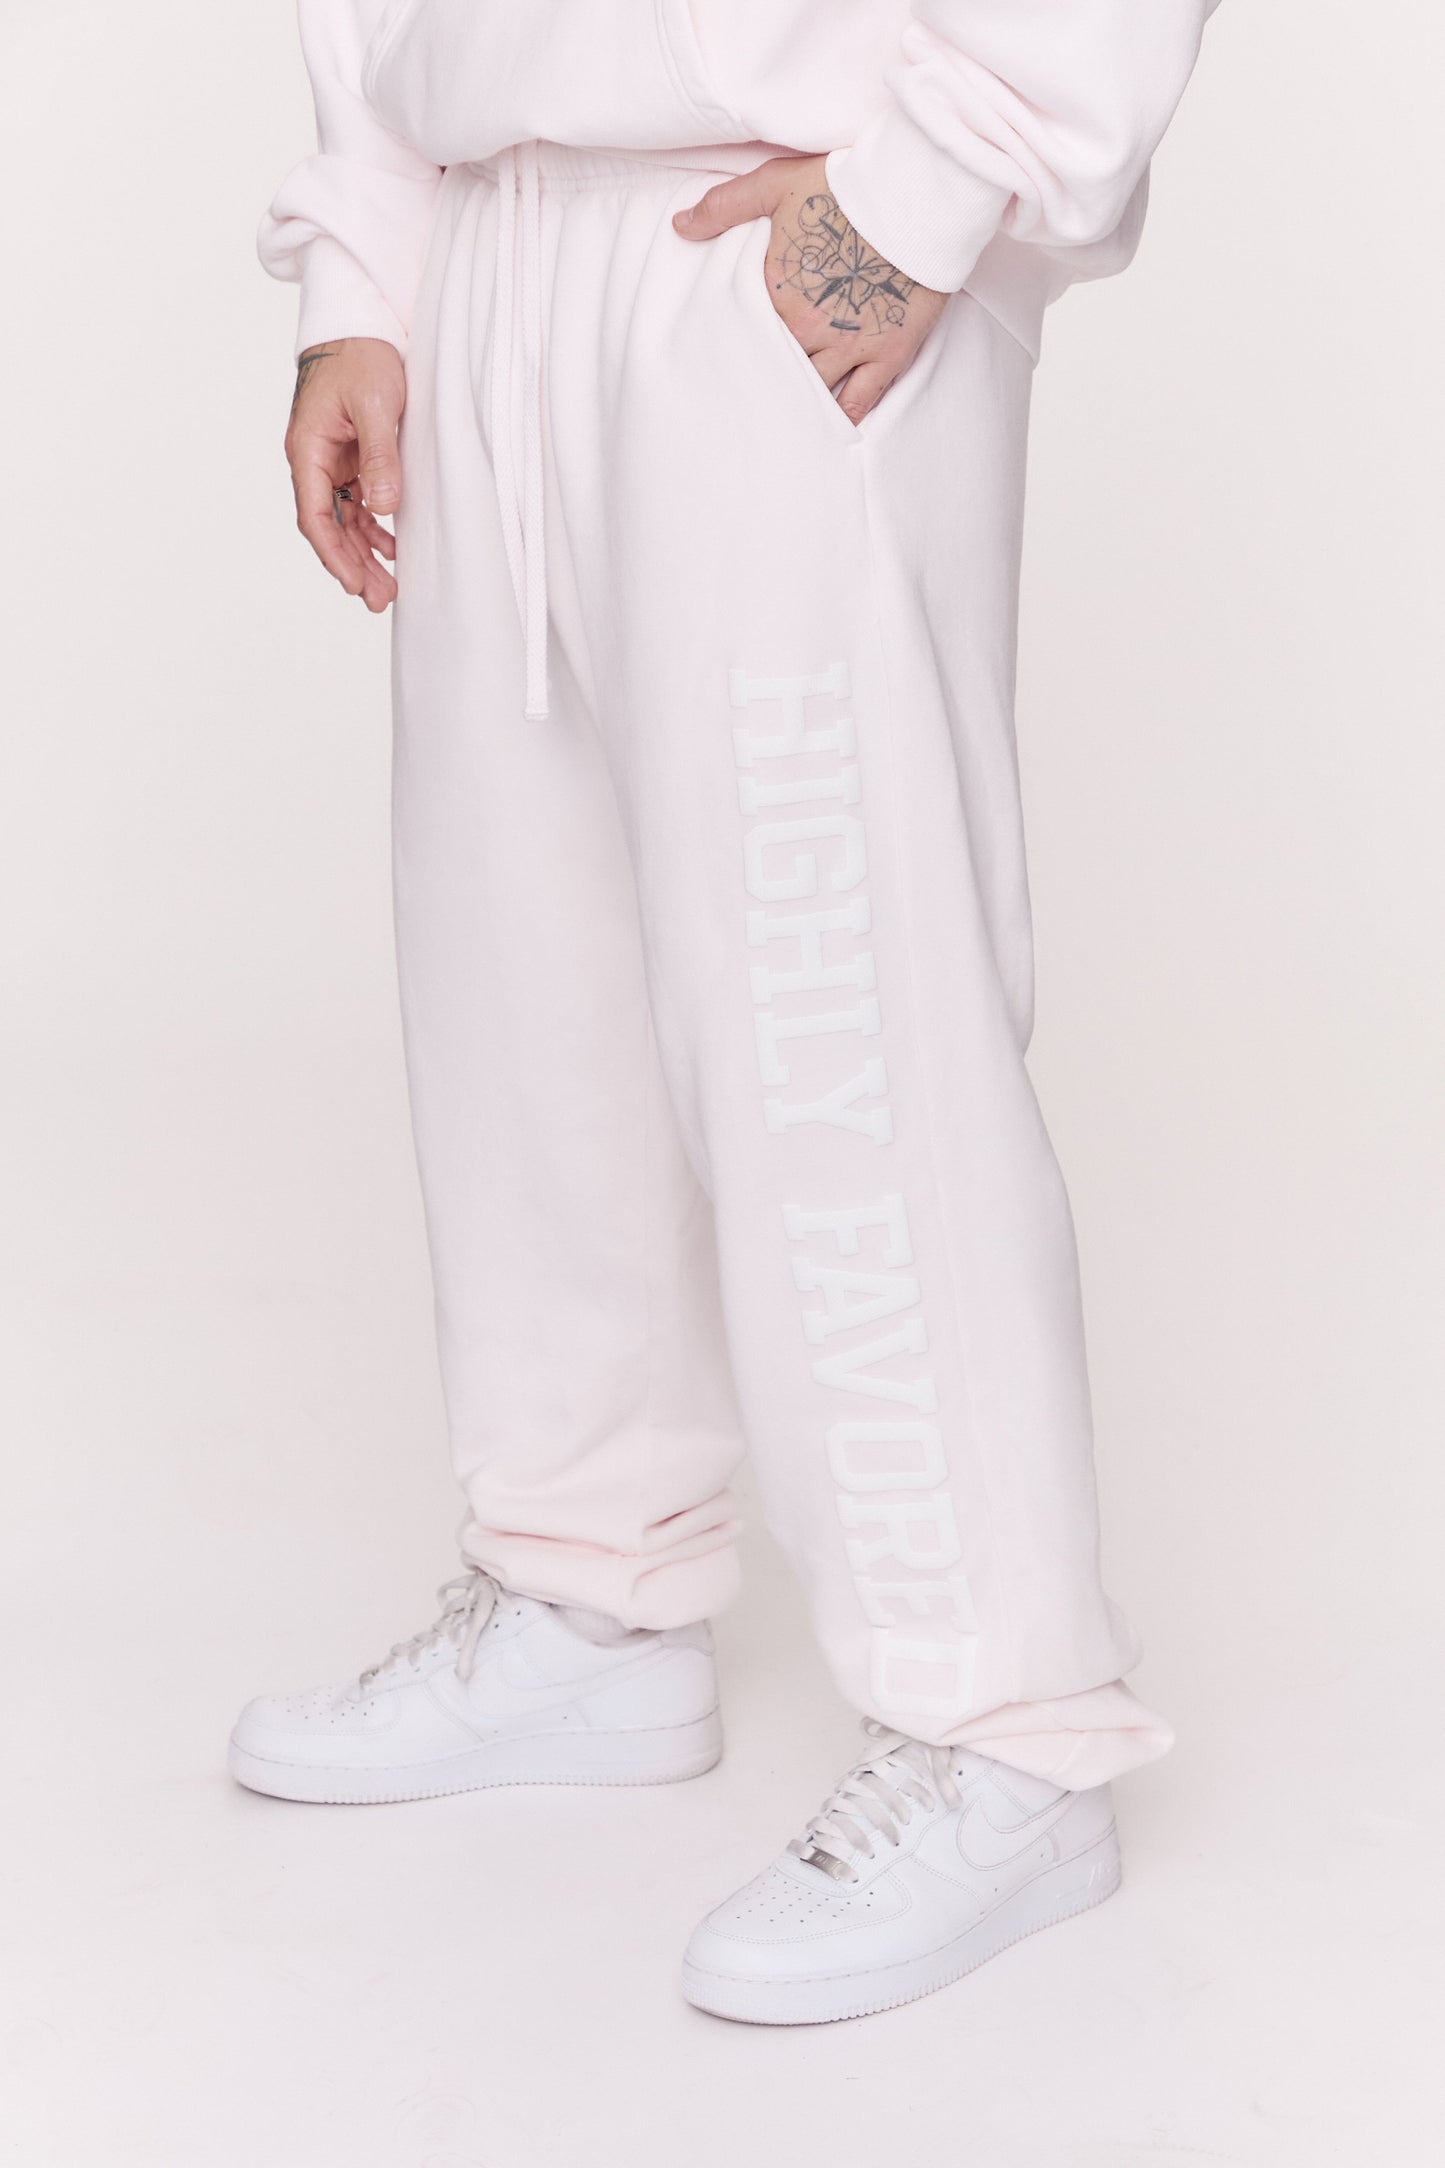 Highly Favored Sweatpants (Pink)